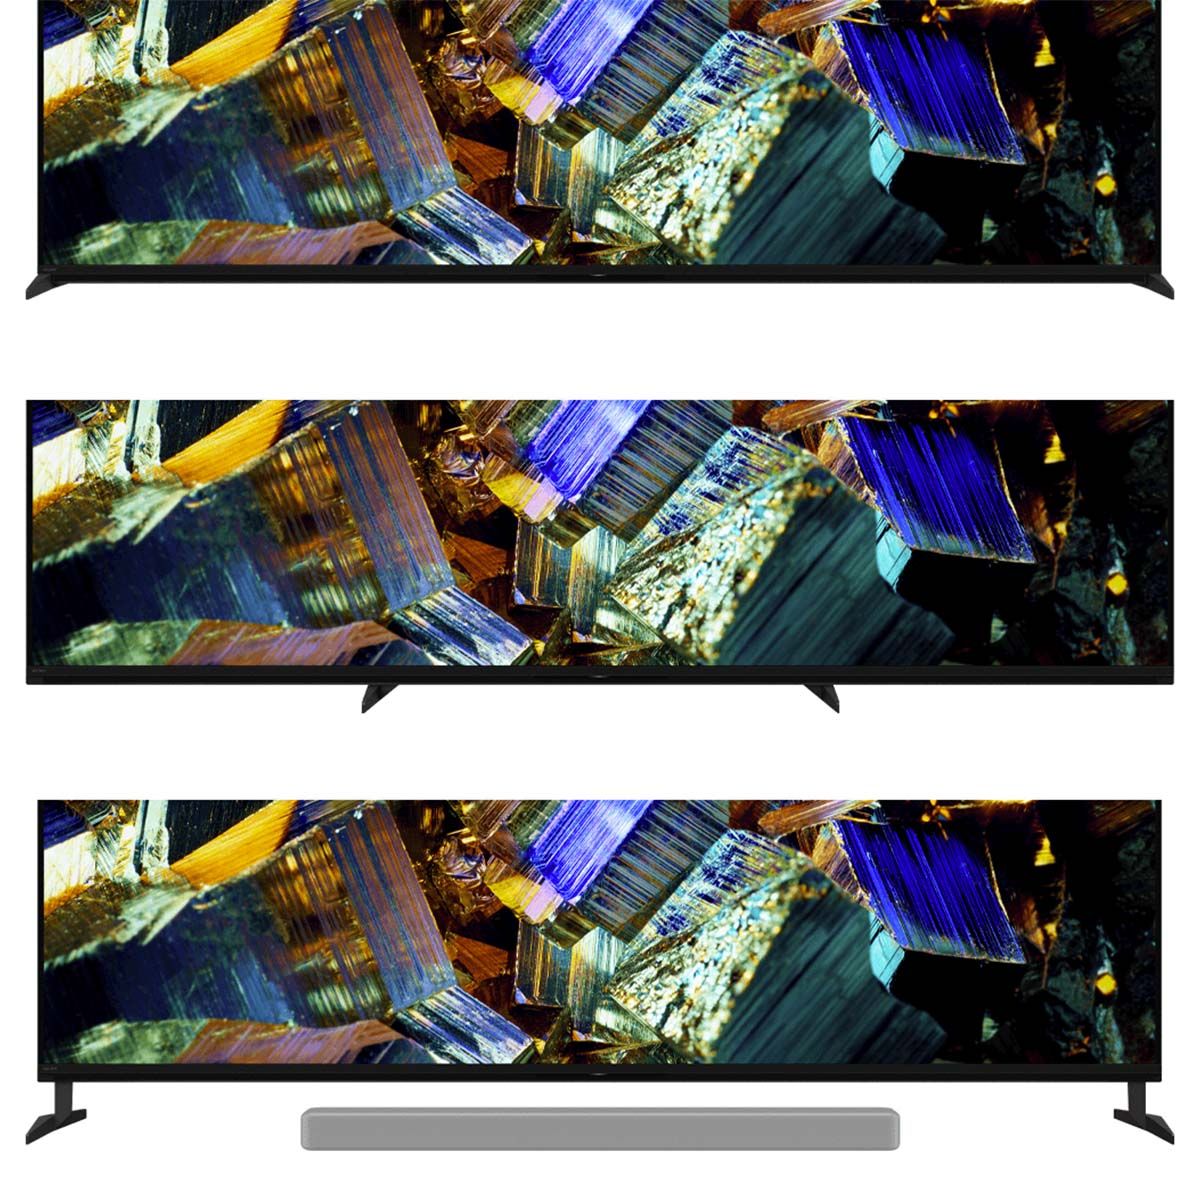 Sony BRAVIA XR Z9K 8K LED HDR Television, view of different stand configurations